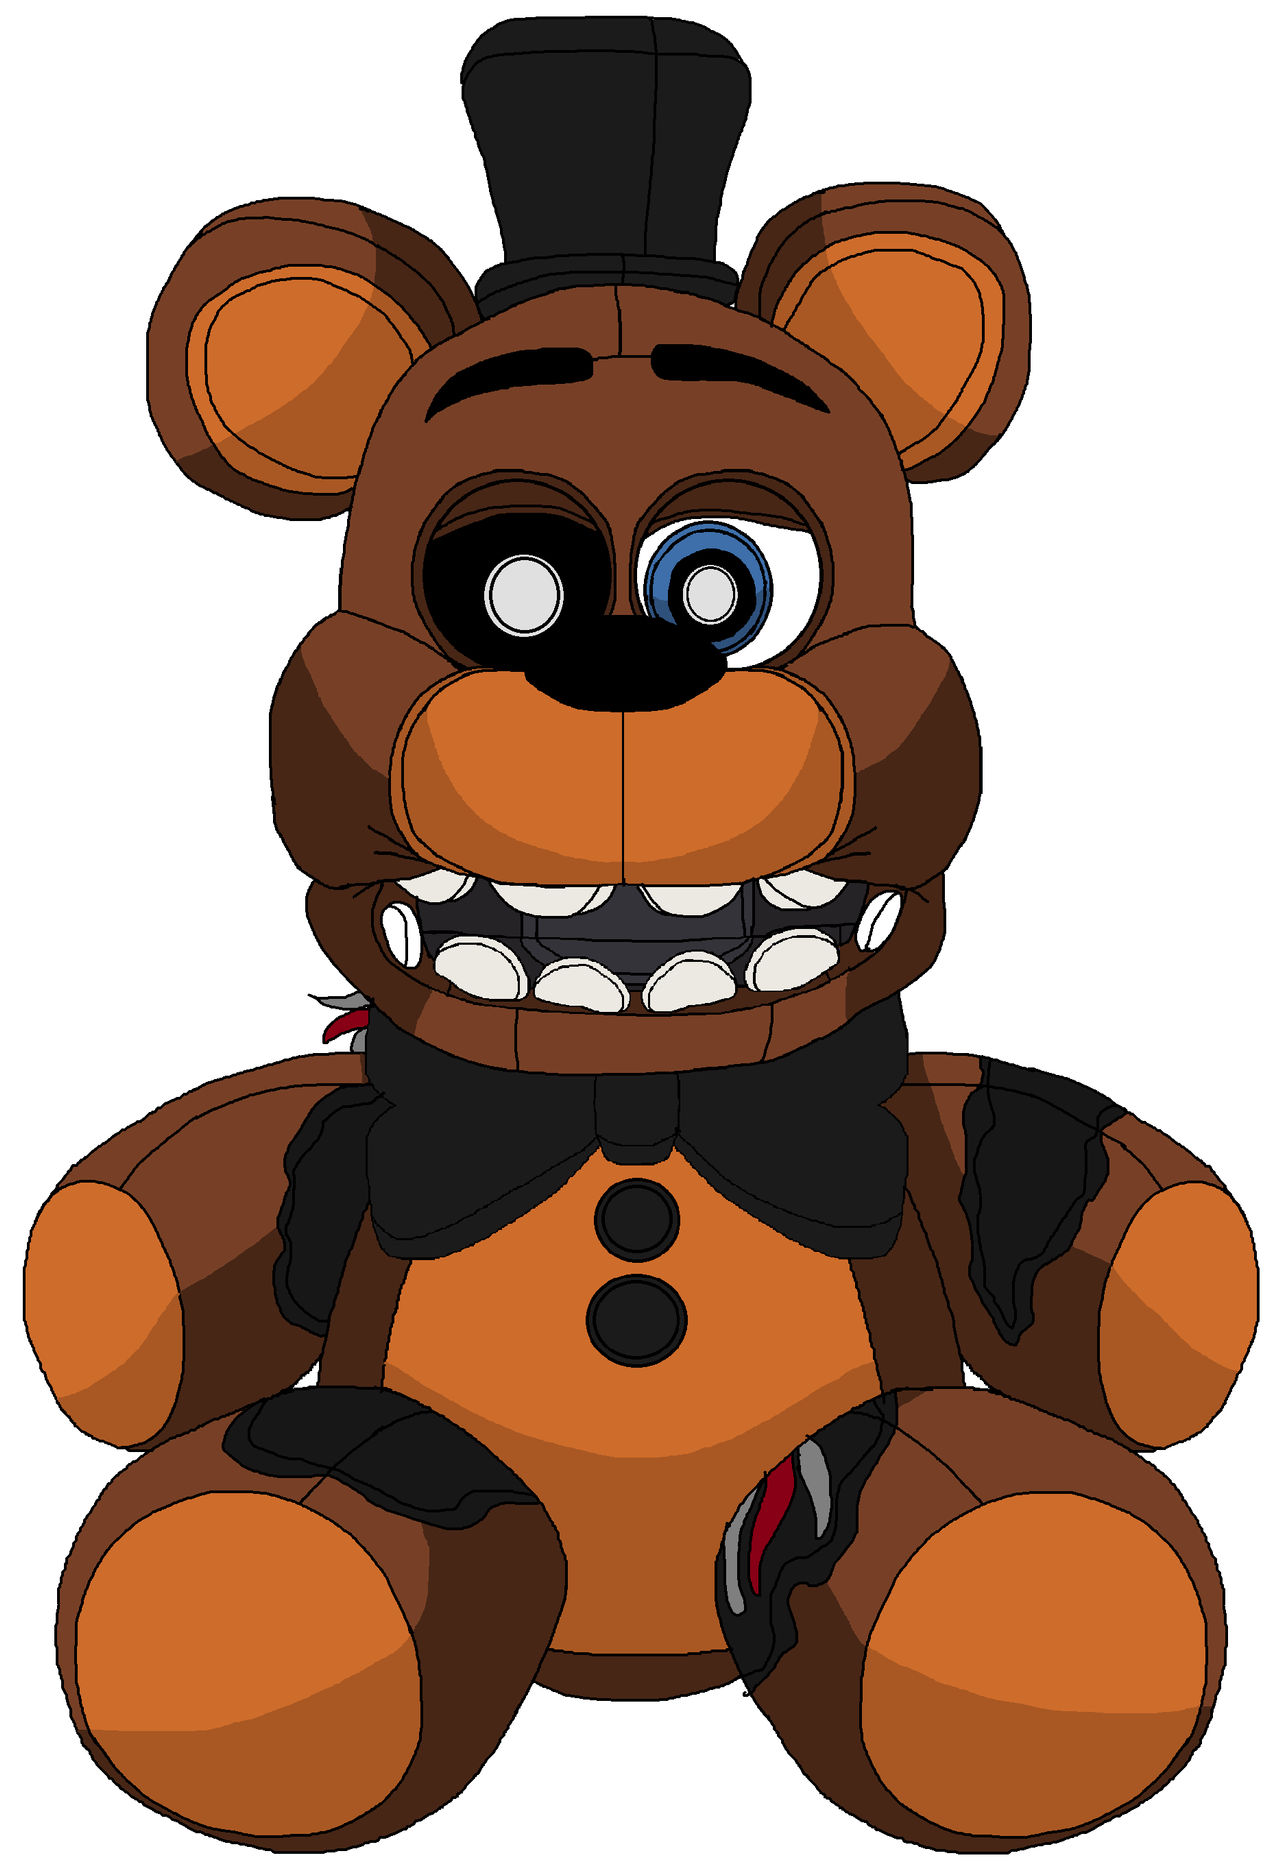 Withered Freddy Plush